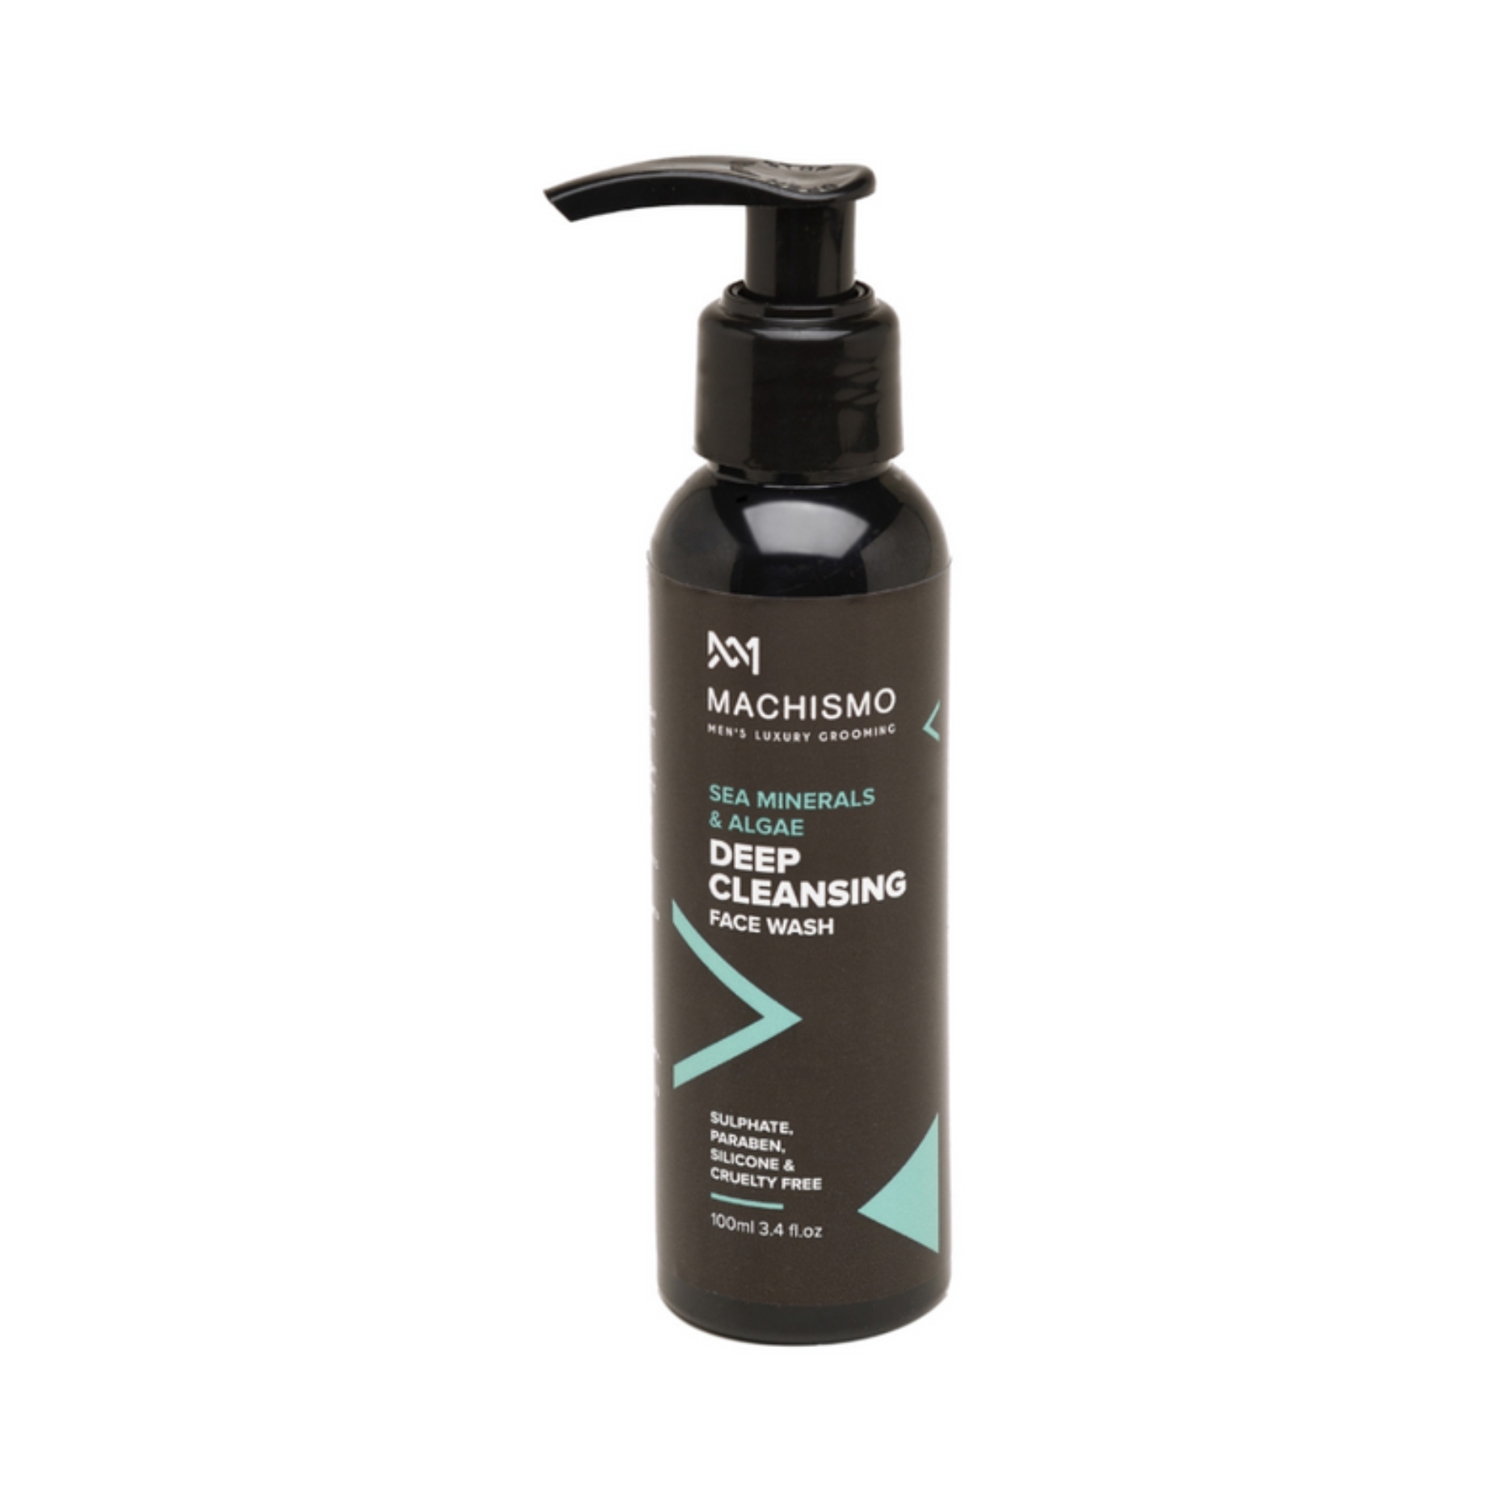 Machismo Deep Cleansing Face Wash (100ml)